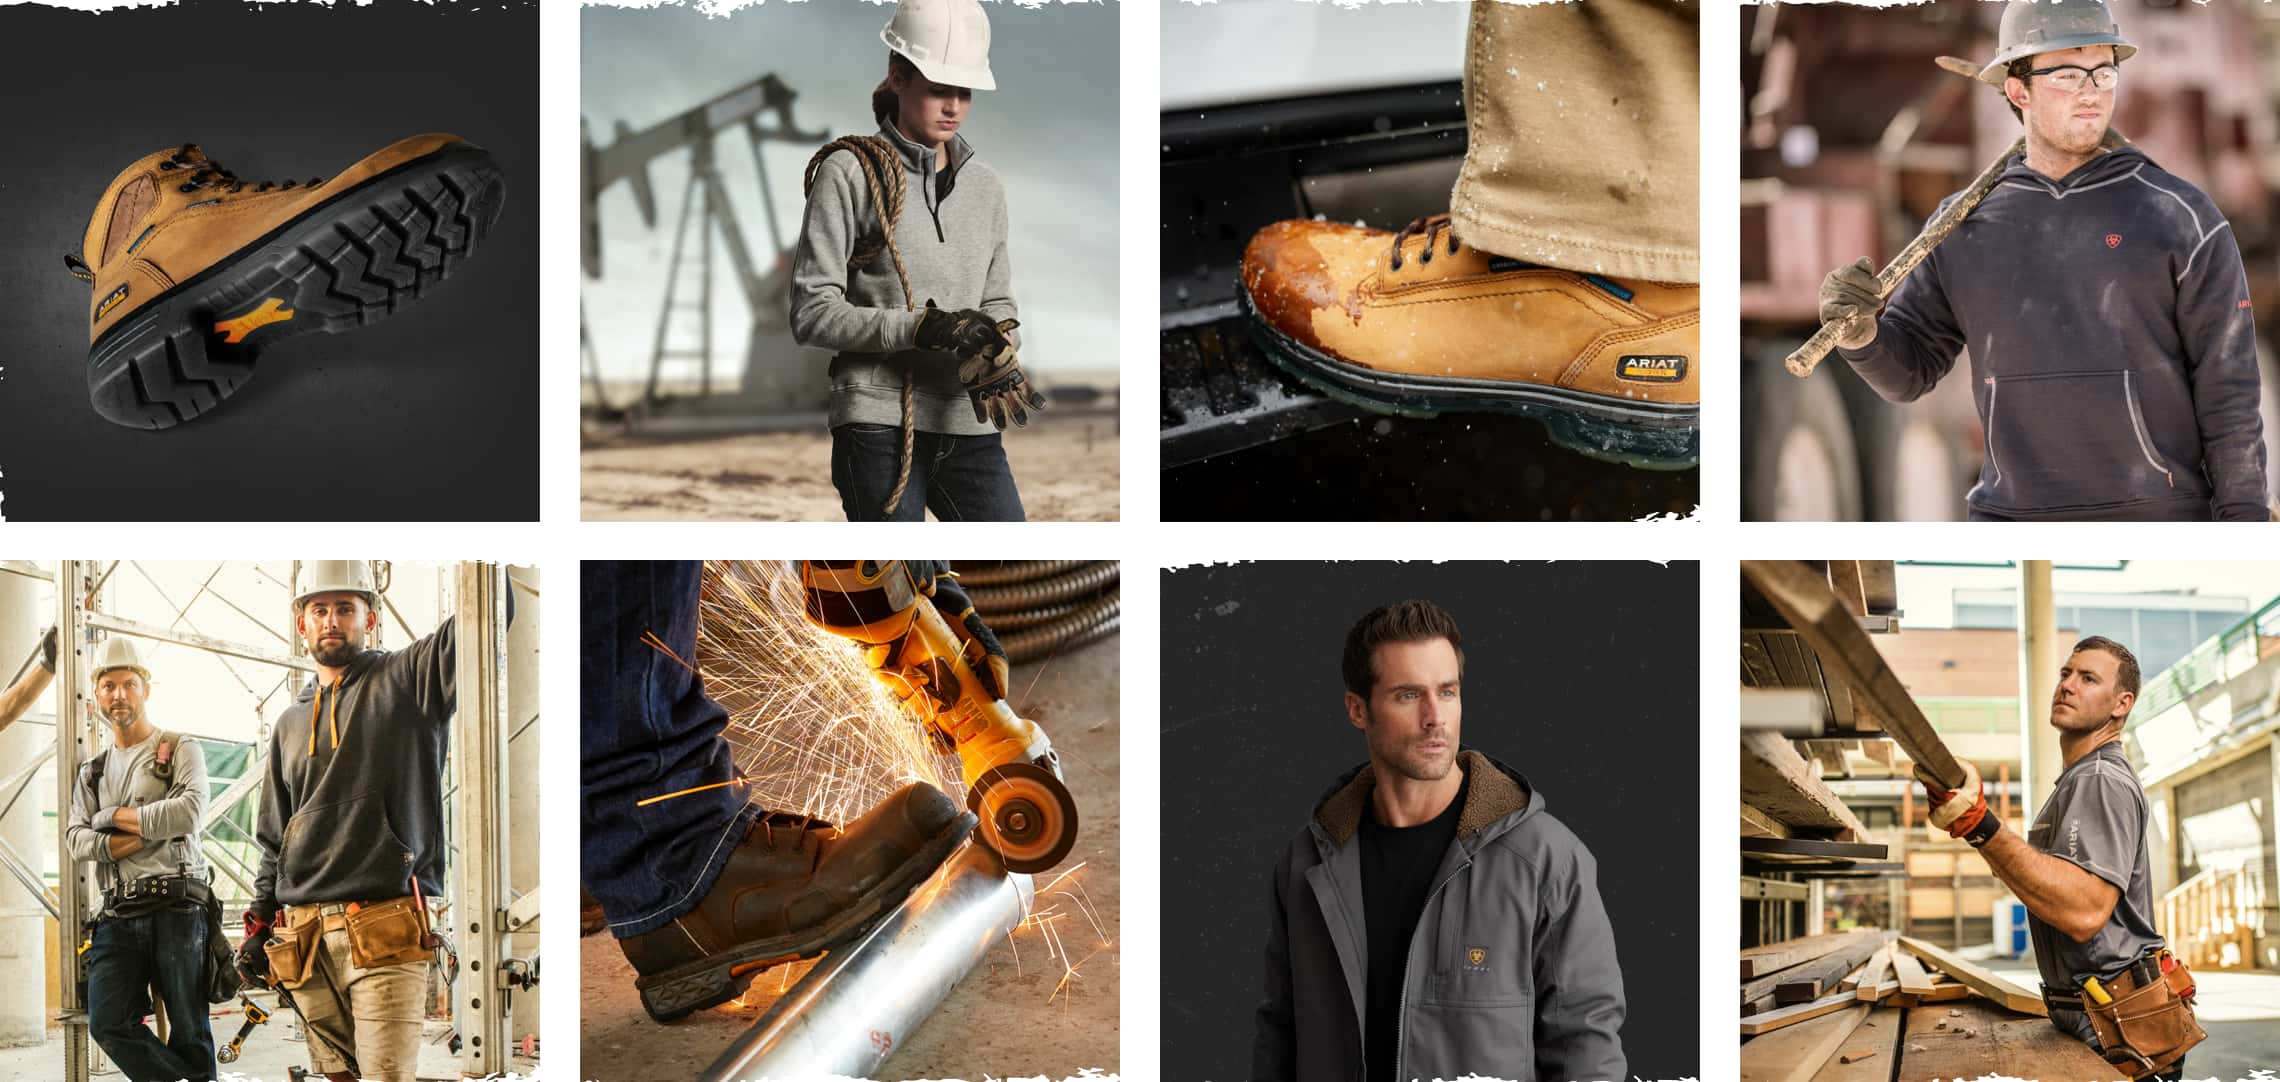 Grid showing ariat brand photography - various photographs of Ariat workwear in-use